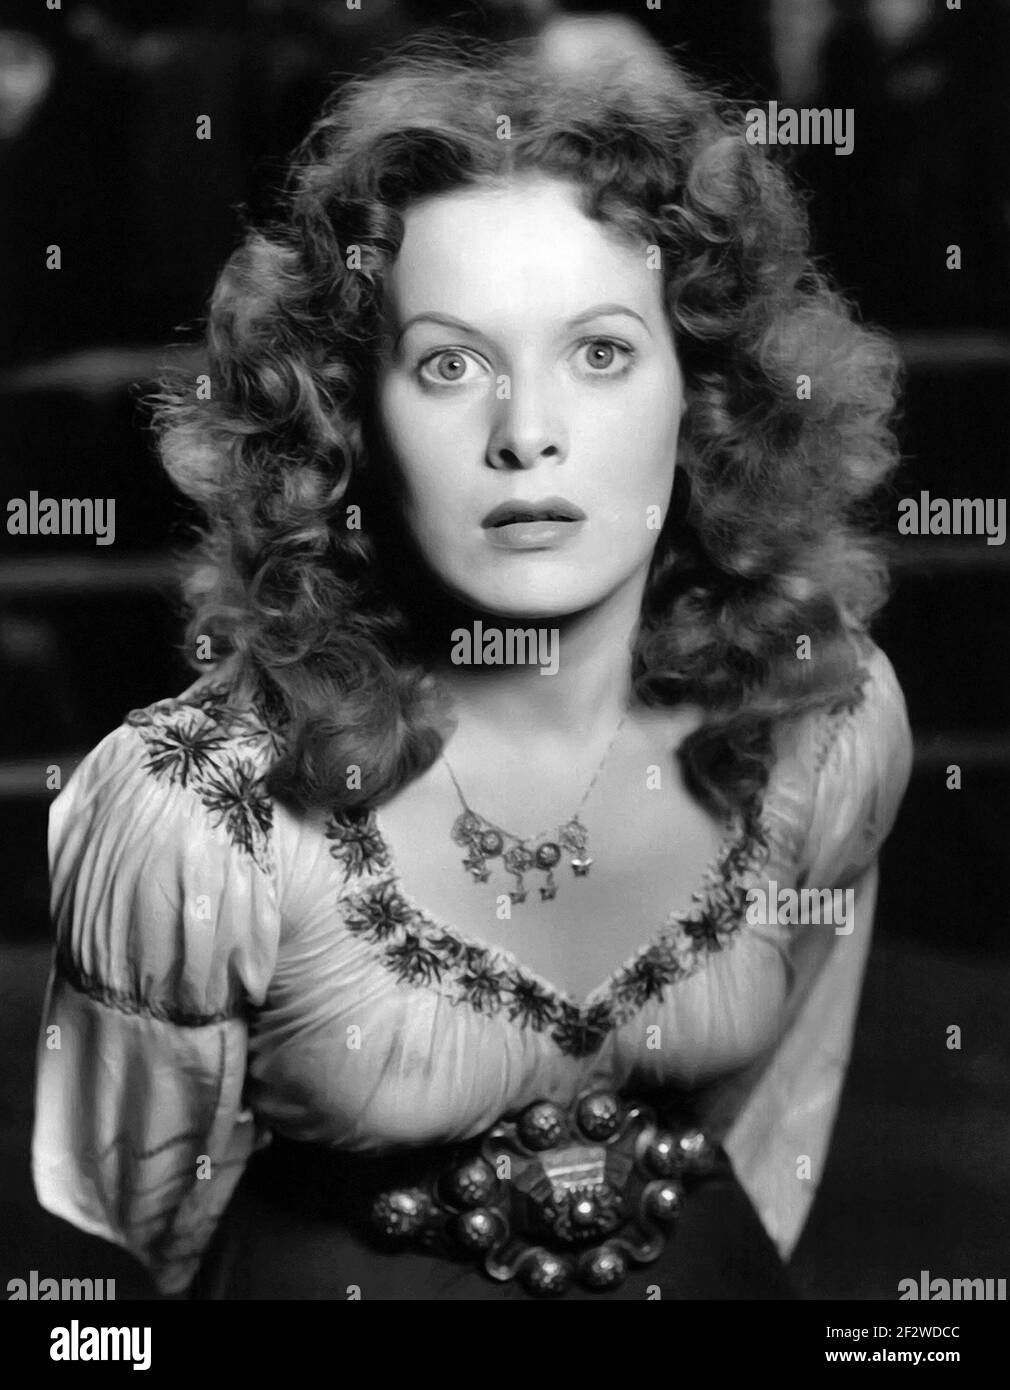 Maureen O'Hara. Portrait of the Irish actress Maureen O'Hara (b. Maureen FitzSimons, 1920-2015), publicity still for The Hunchback of Notre Dame (1939) Stock Photo